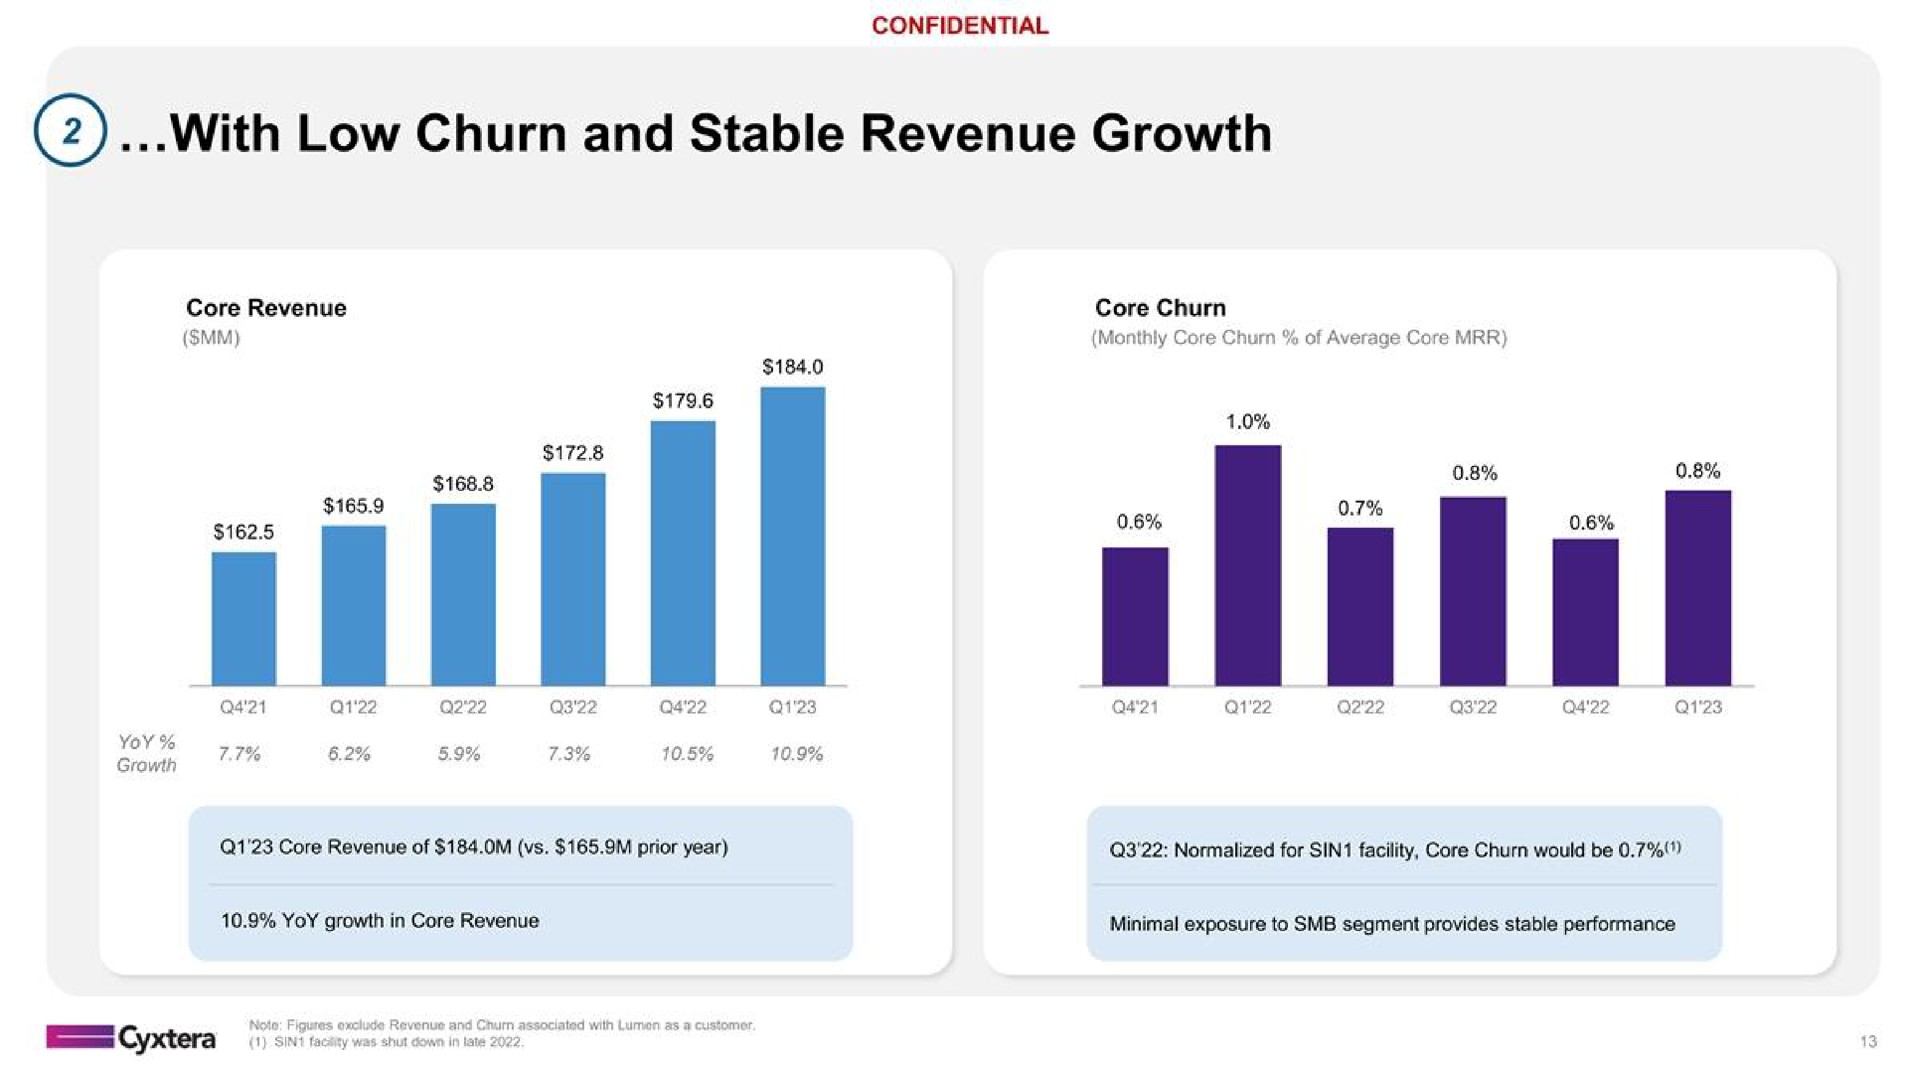 with low churn and stable revenue growth | Cyxtera